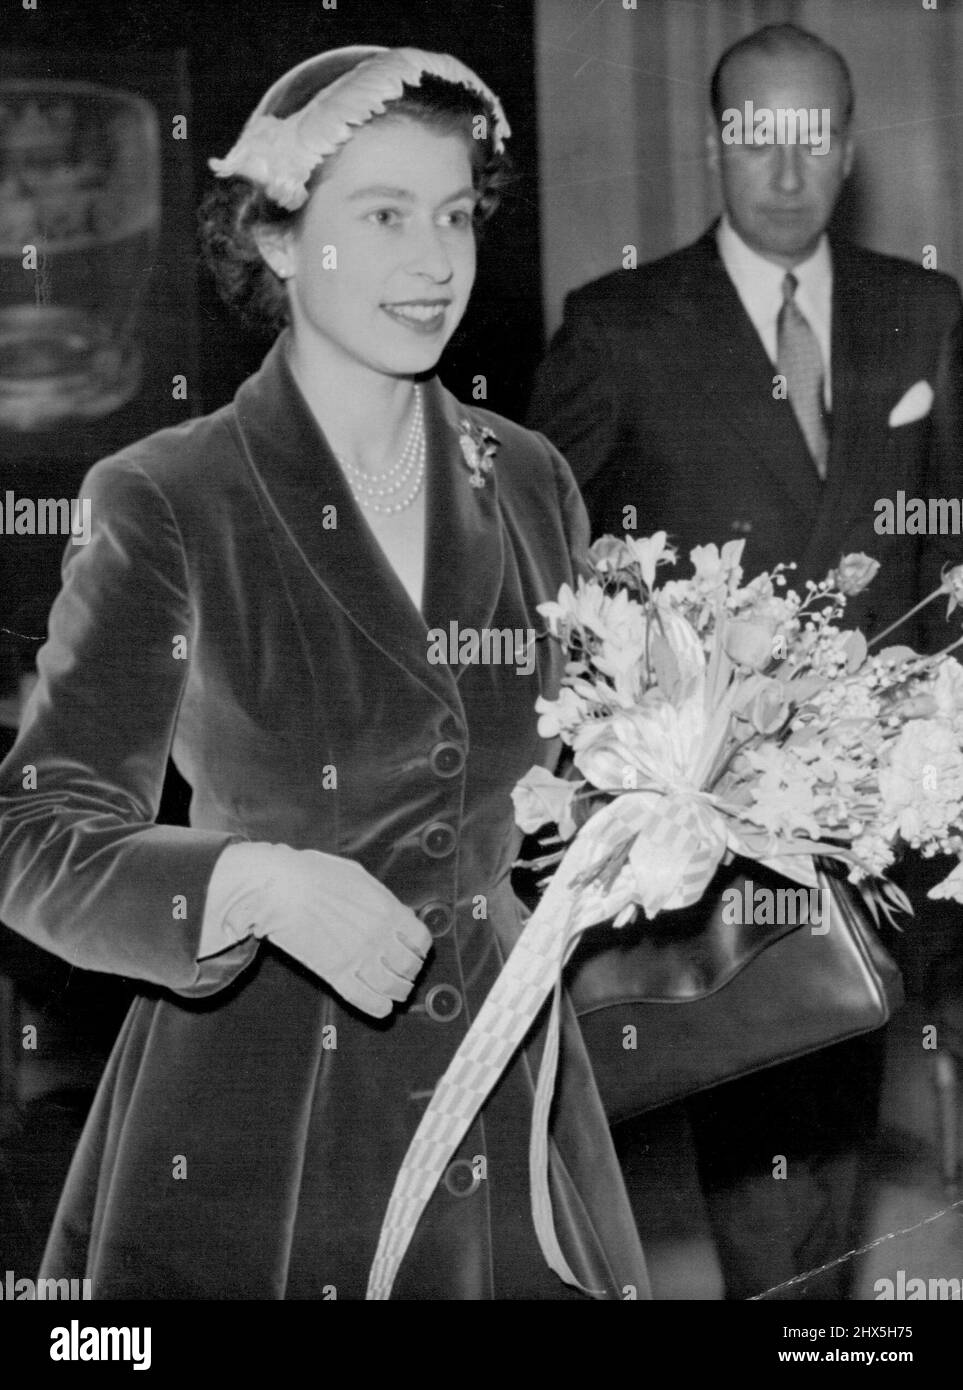 Queen At Steuben Glass Exhibition. Queen Elizabeth photographed during her private visit to the Steuben Glass Exhibition at Park Lane House, Park Lane, London, today November 1. Steuben Glass is made in Corning, New York. November 1, 1955. Stock Photo